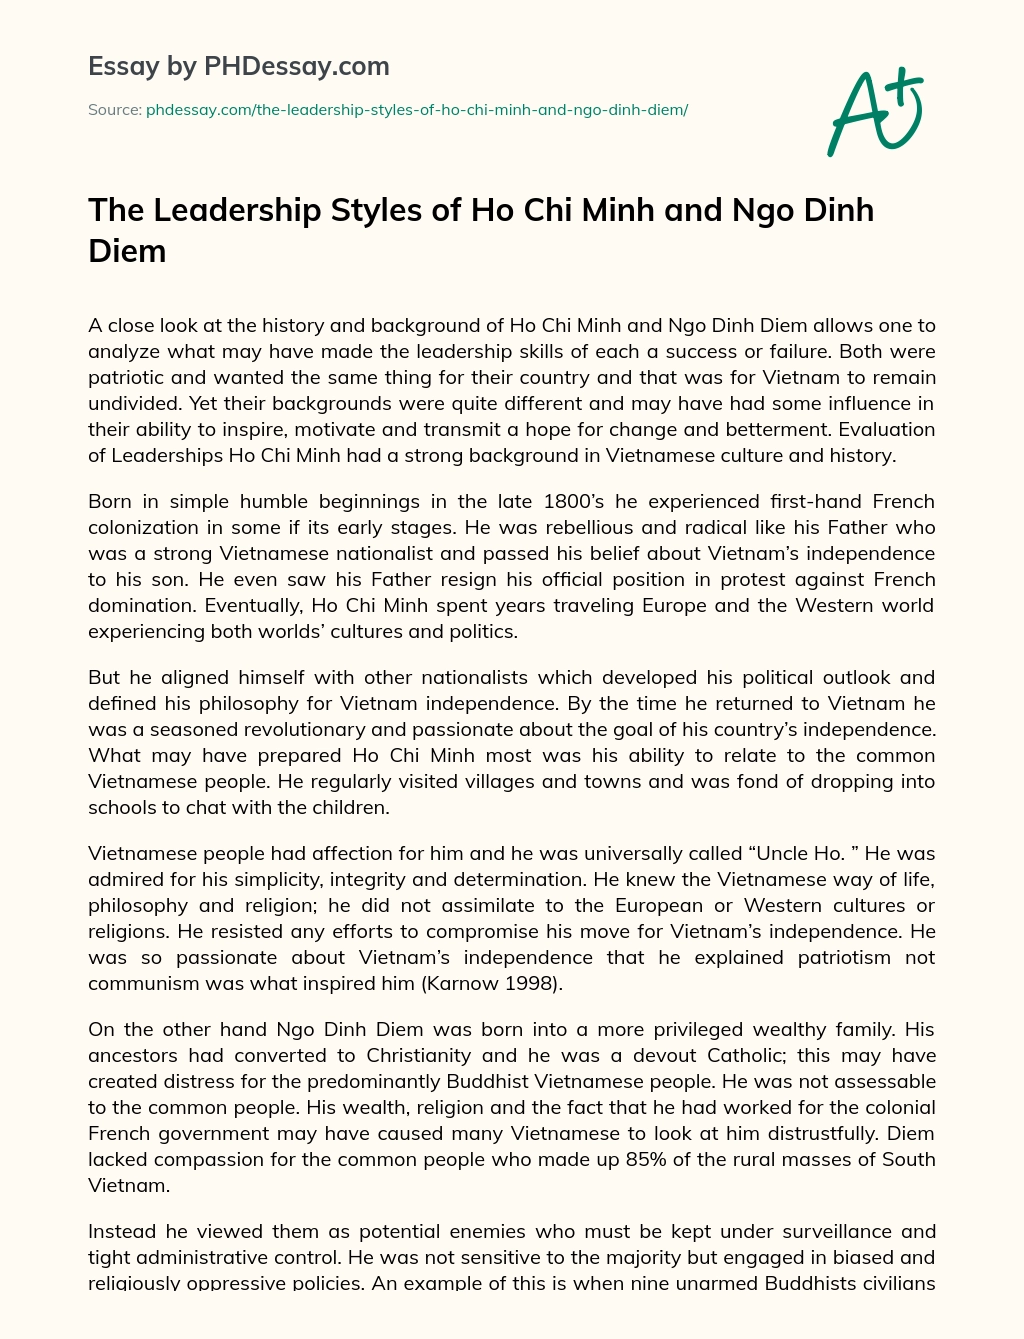 The Leadership Styles of Ho Chi Minh and Ngo Dinh Diem essay